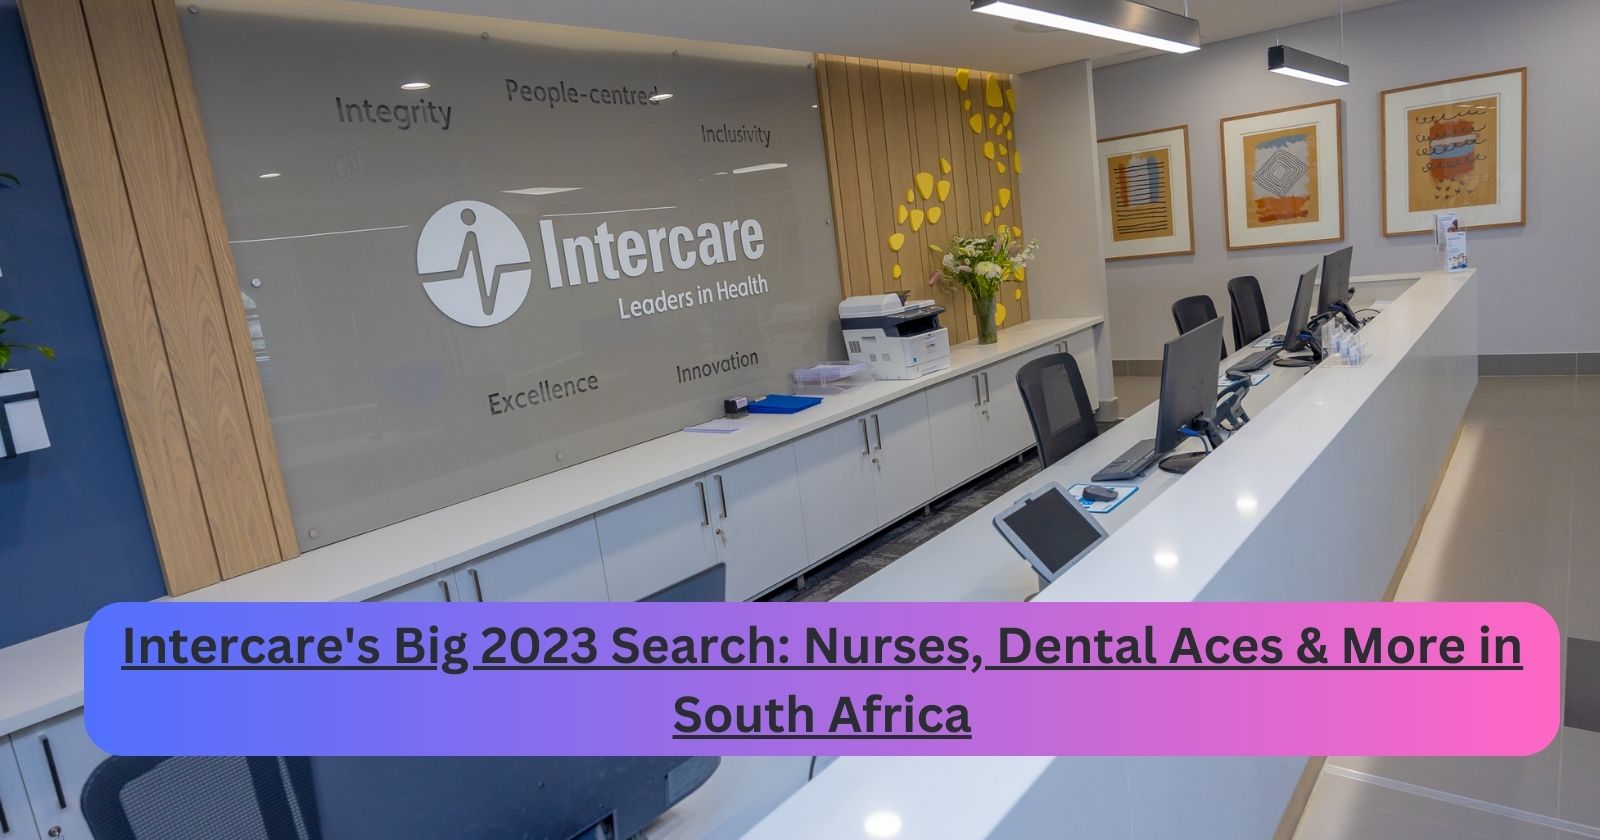 Intercare Big 2023 Search: Nurses, Dental Aces & More in South Africa